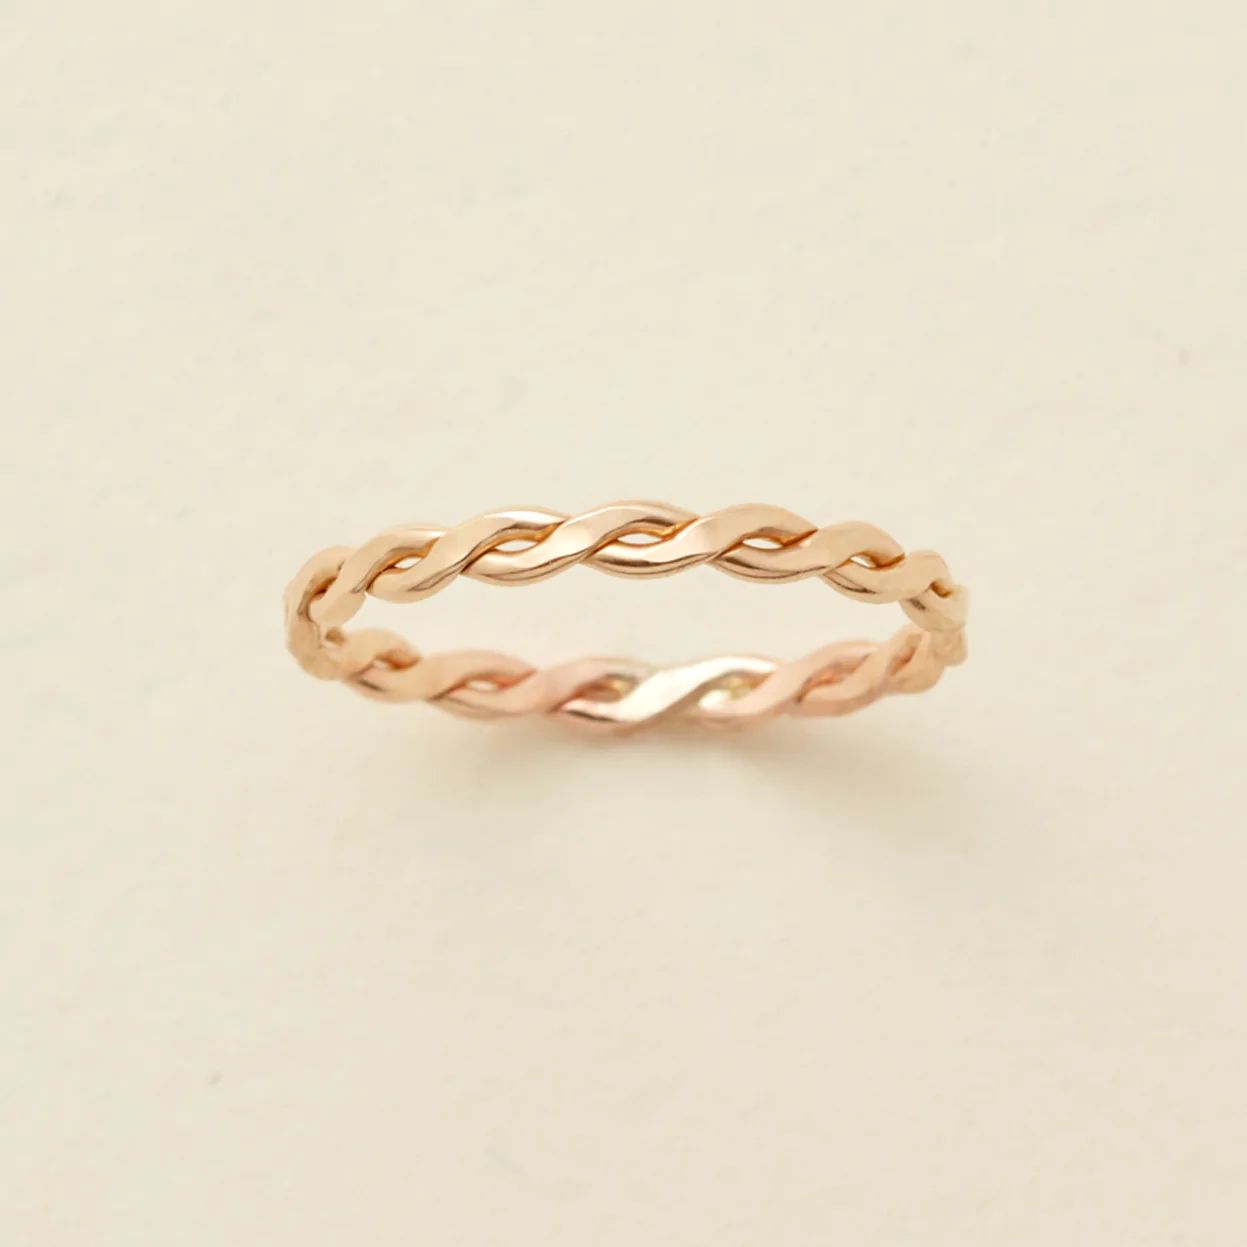 Laurel Ring | Made by Mary (US)